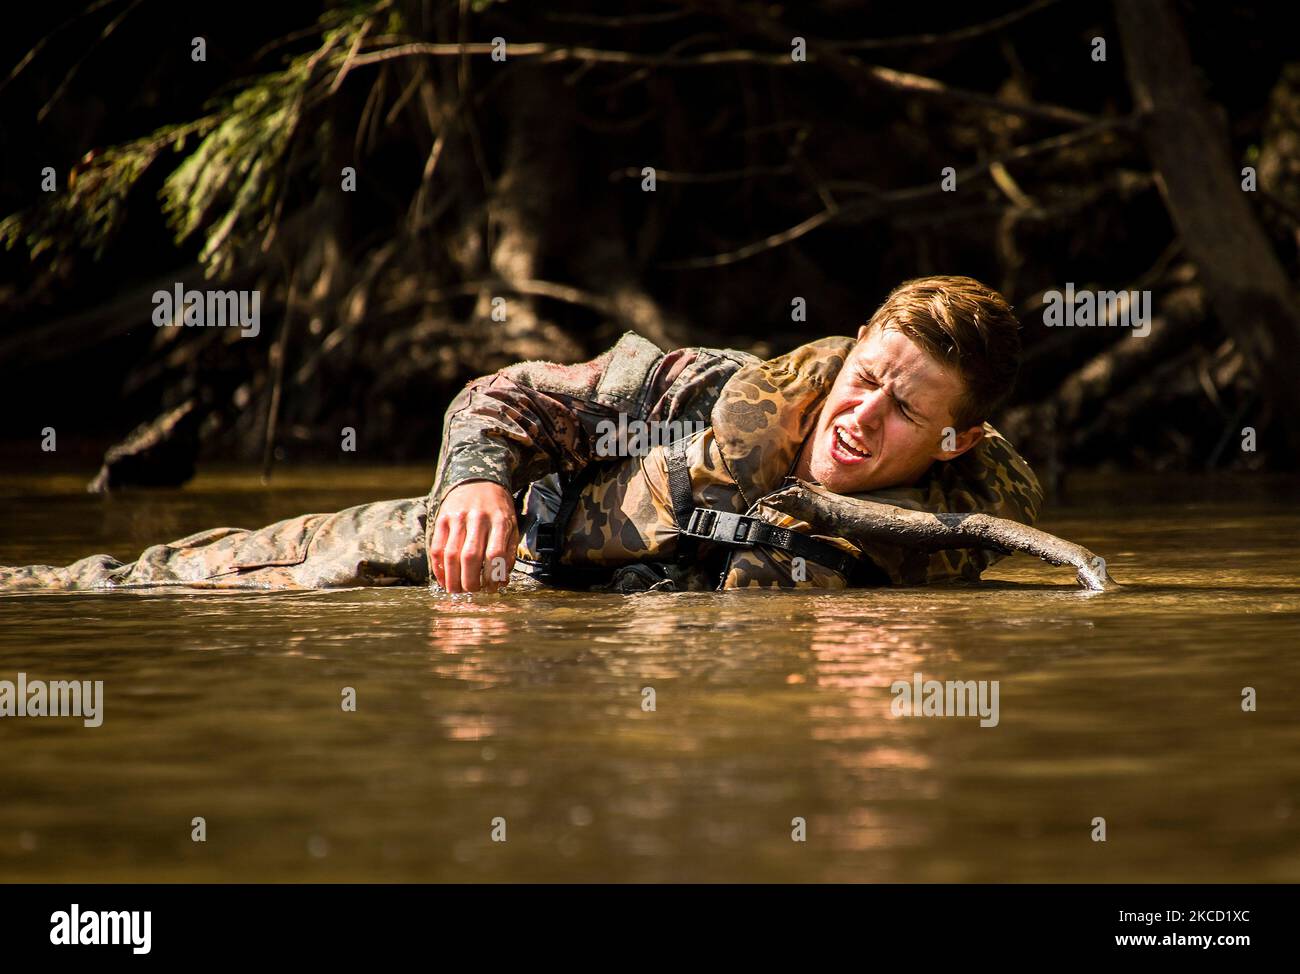 A simulated wounded soldier yells for help whily lying in the river. Stock Photo